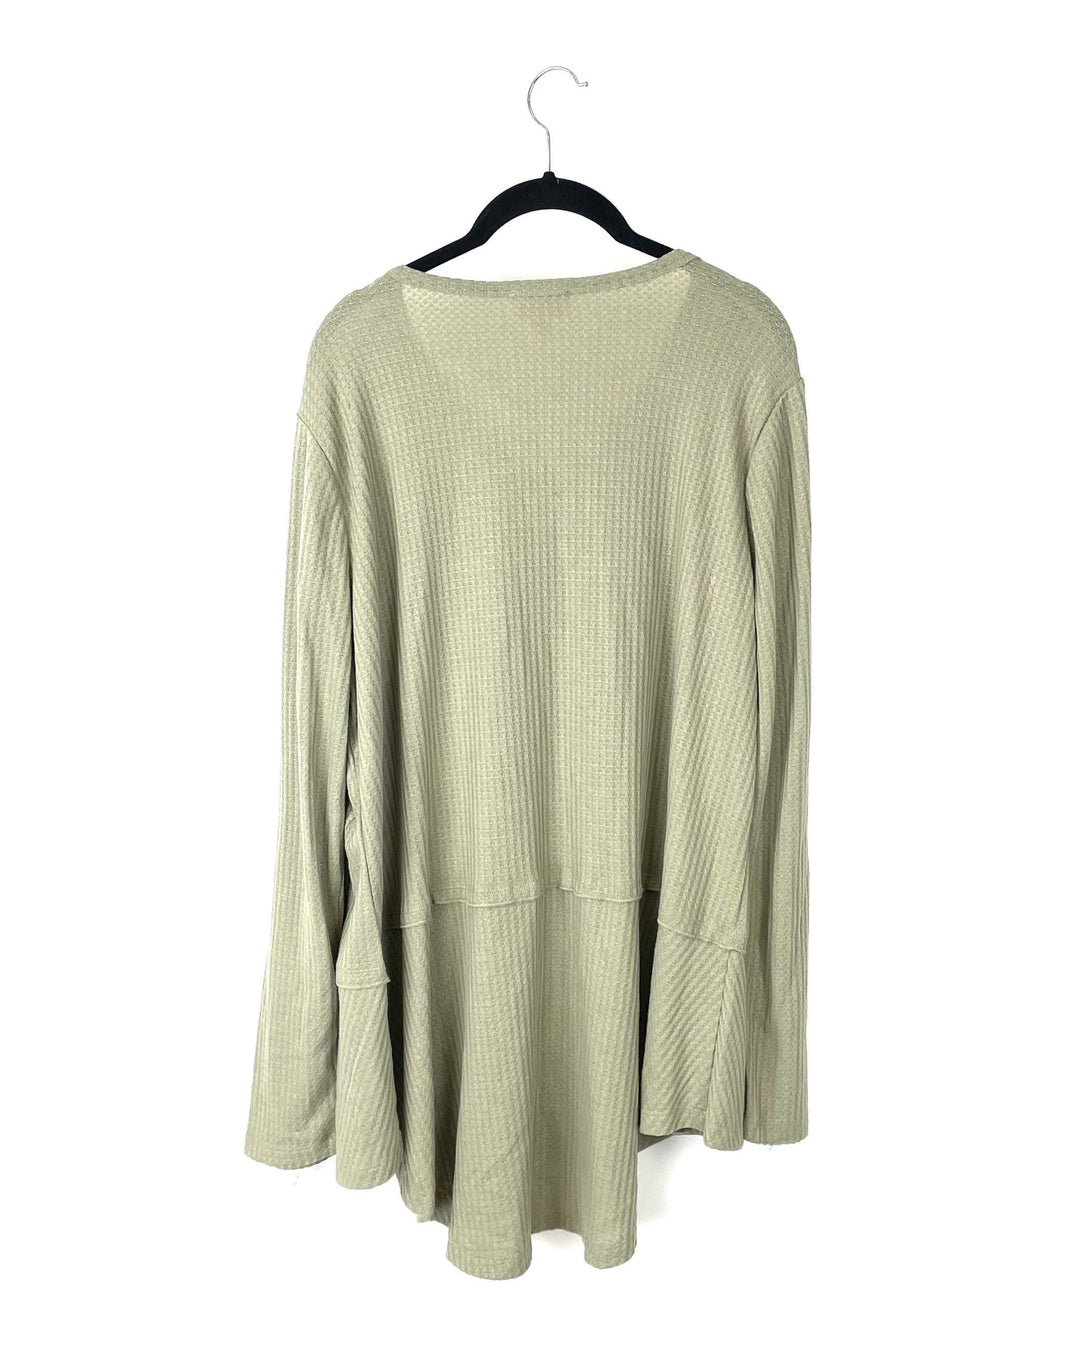 Light Green Sweater With Ruffled Bottom - Large/XL